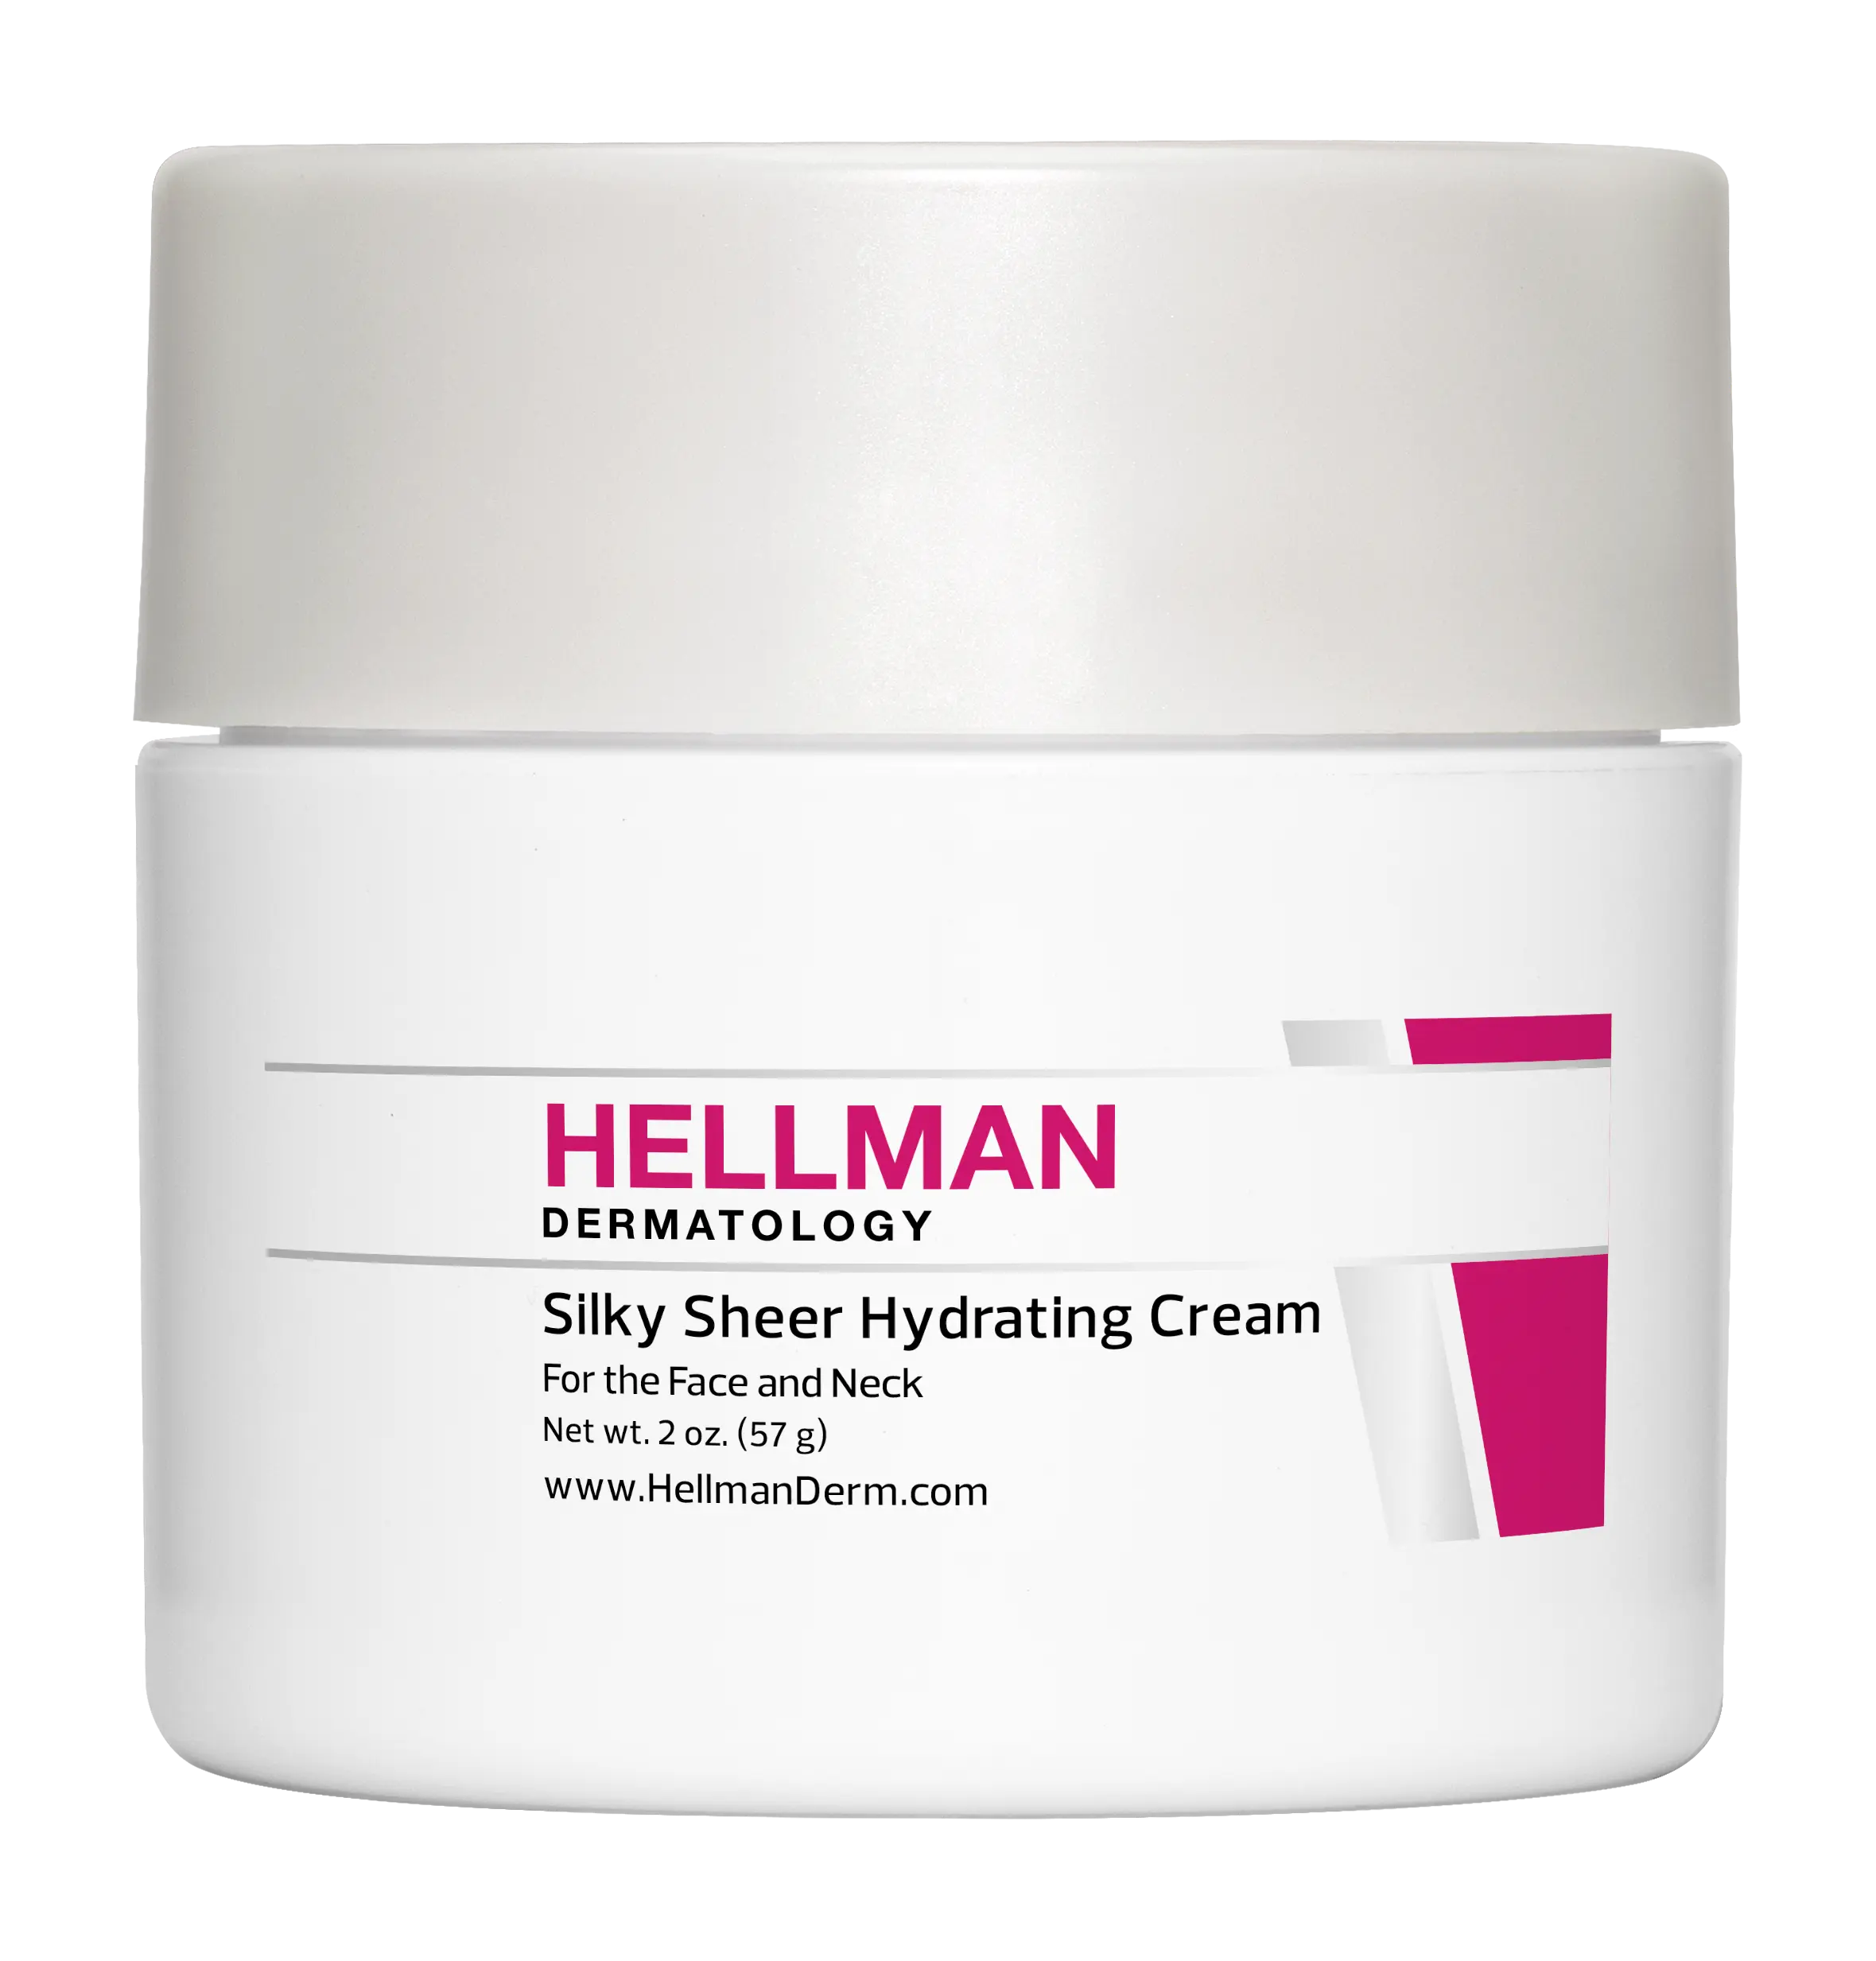 Silky Sheer Hydrating Cream For the Face and Neck. Price: $30